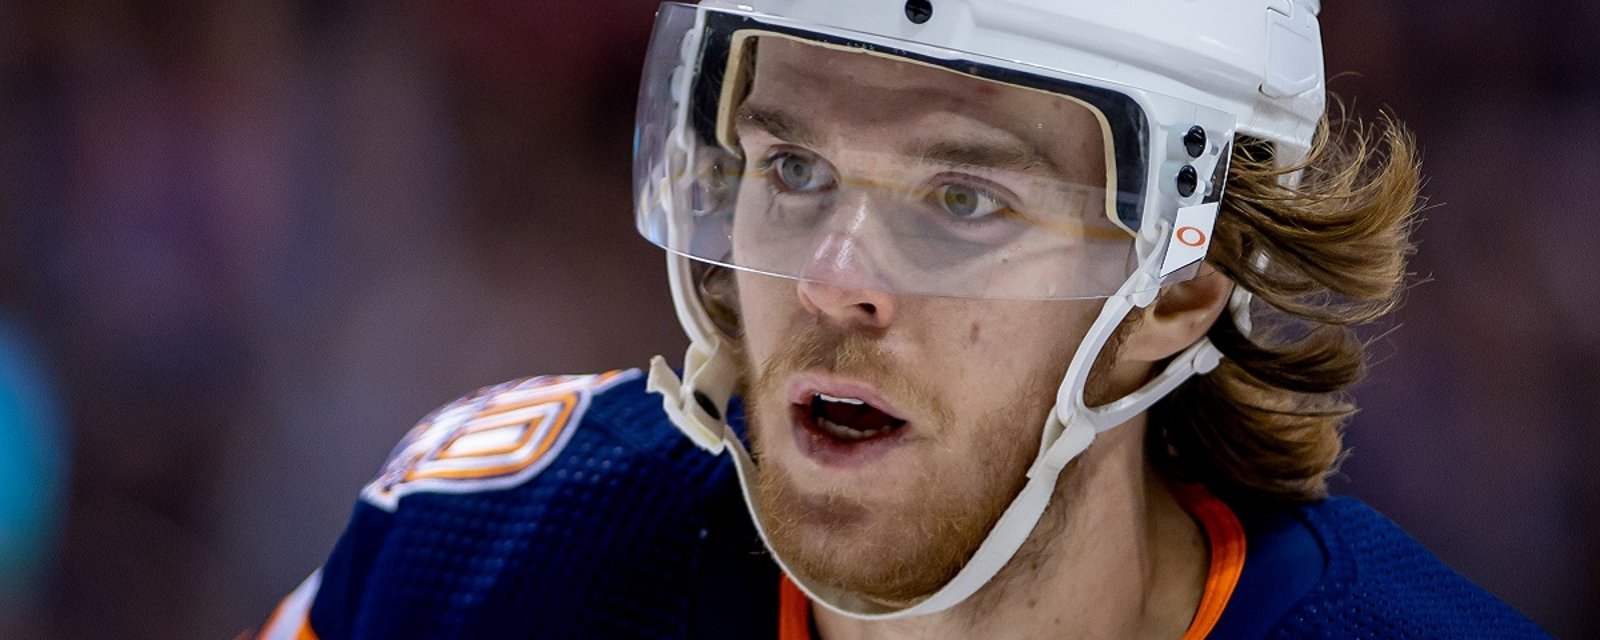 Bruins insider says McDavid does not deserve to be nominated for the Hart.